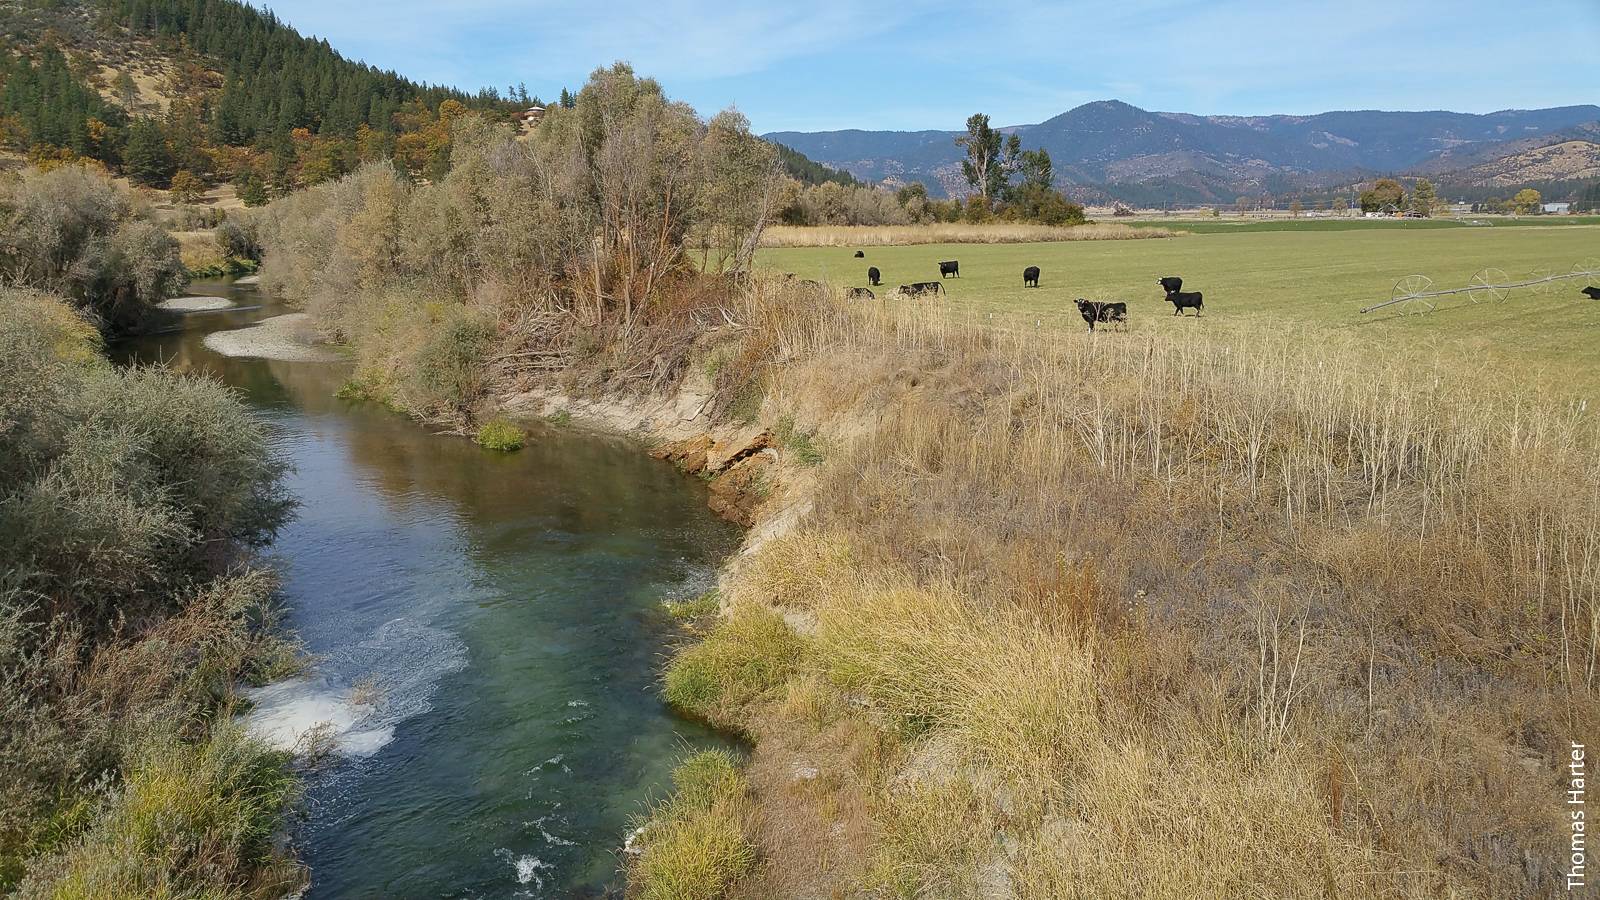 The Scott River is an important salmonid spawning habitat that depends on groundwater to maintain stream flow during the summer. A hydrologic model developed by UC researchers can help predict the impact of different groundwater and surface water management scenarios on stream flow.